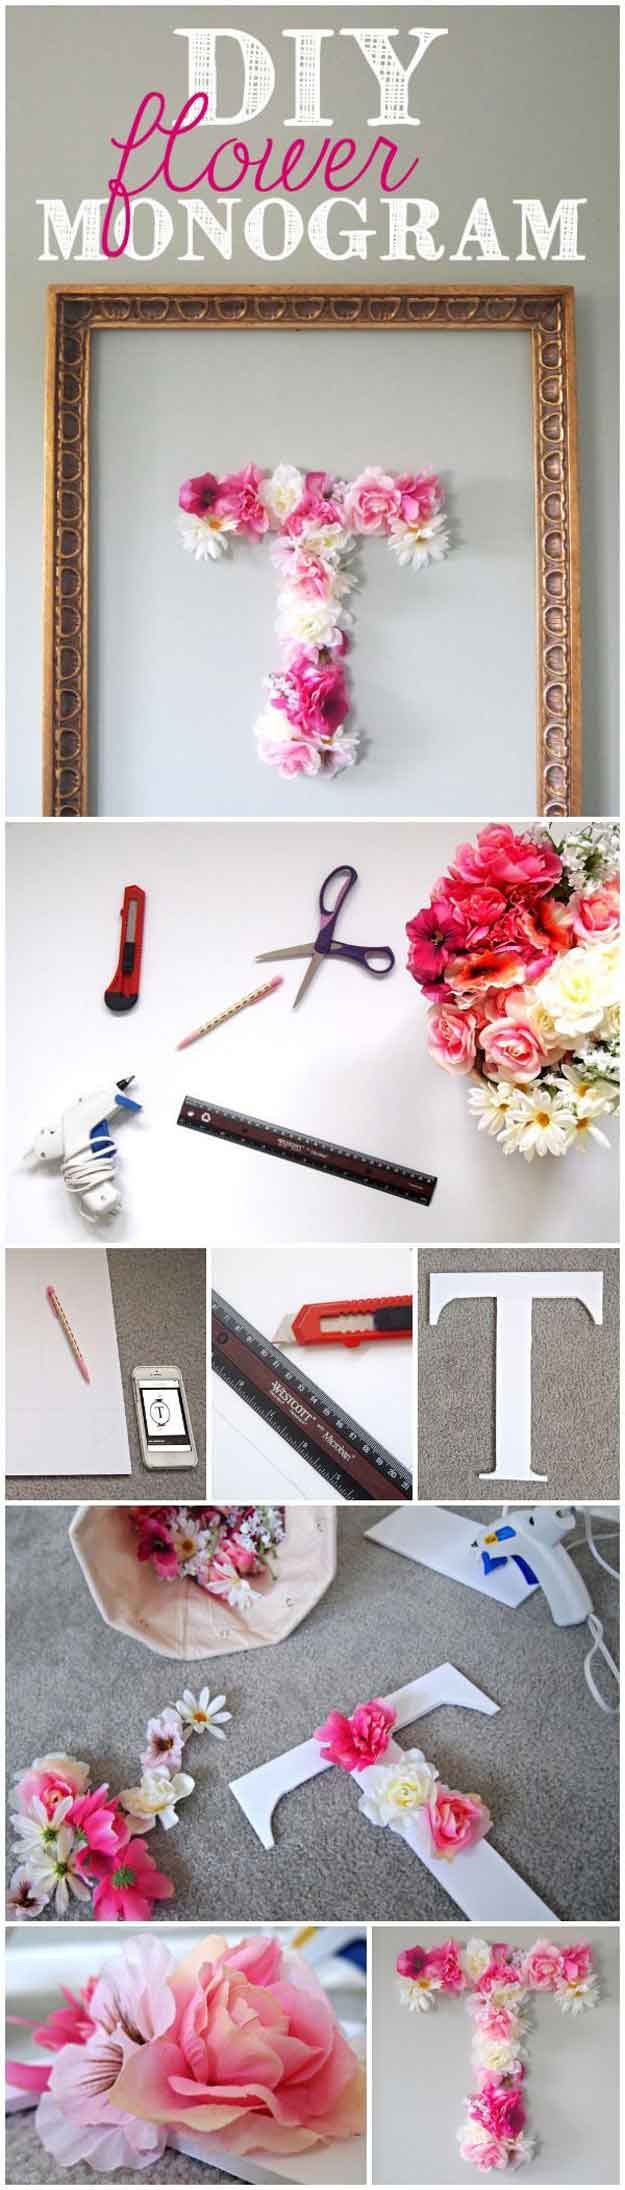 Cute Crafts To Decorate Your Room
 DIY Projects for Teens Bedroom DIY Ready